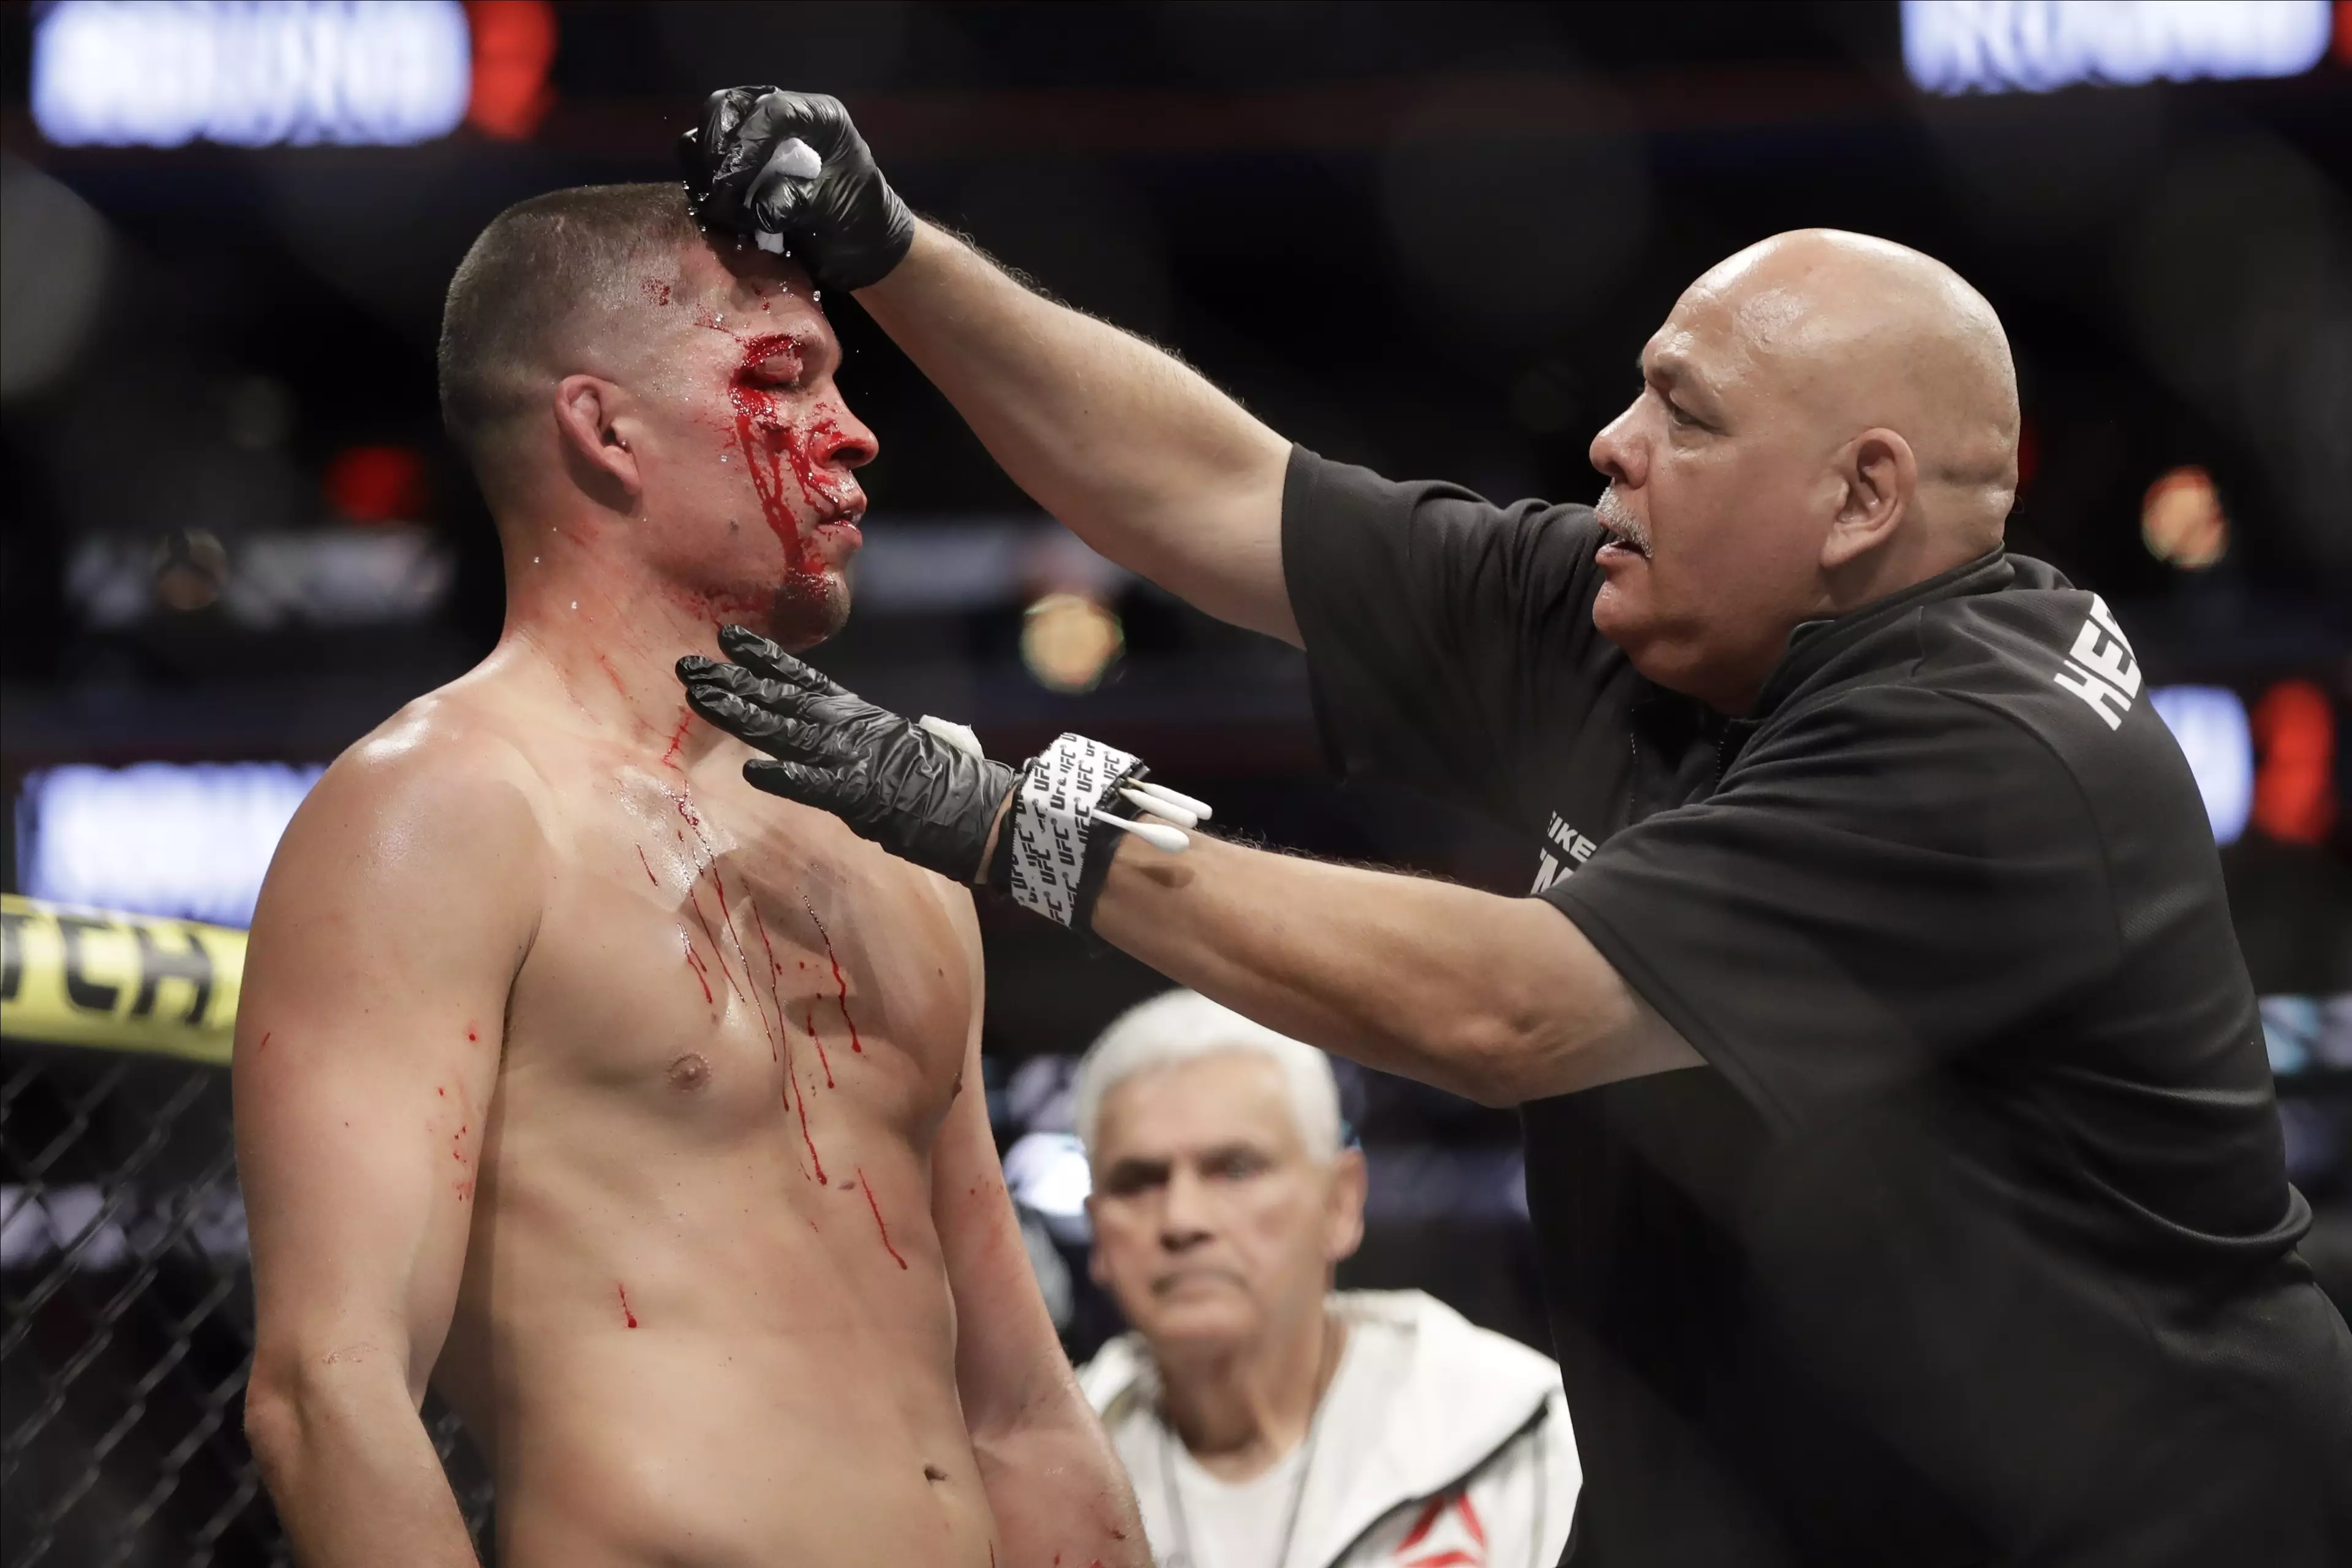 Diaz was cut badly during the fight. Image: PA Images